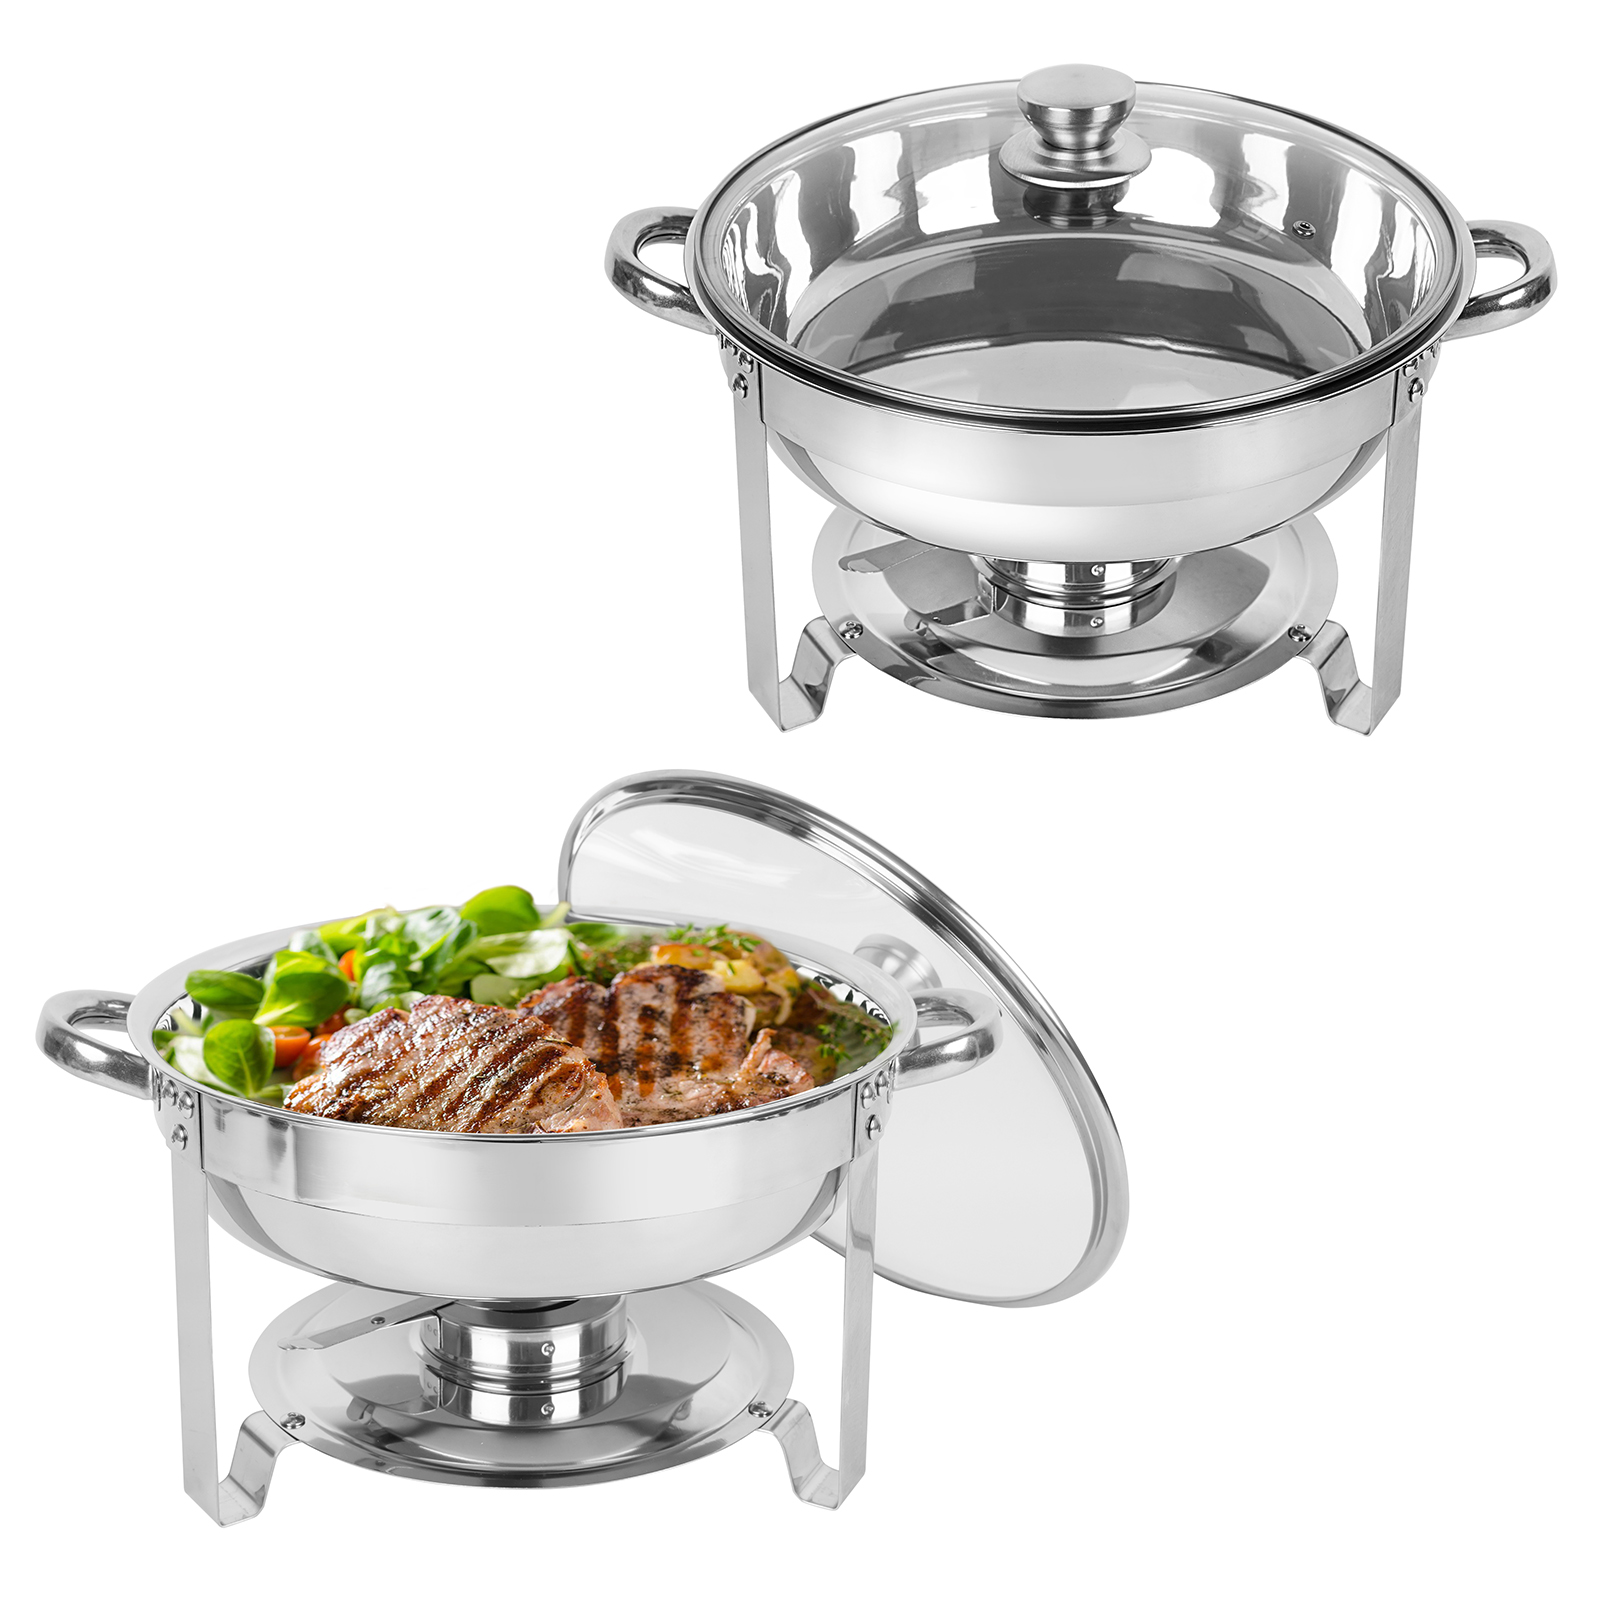 ROVSUN 2 Pack Stainless Steel Chafing Dishes Buffet Set Half Size ...